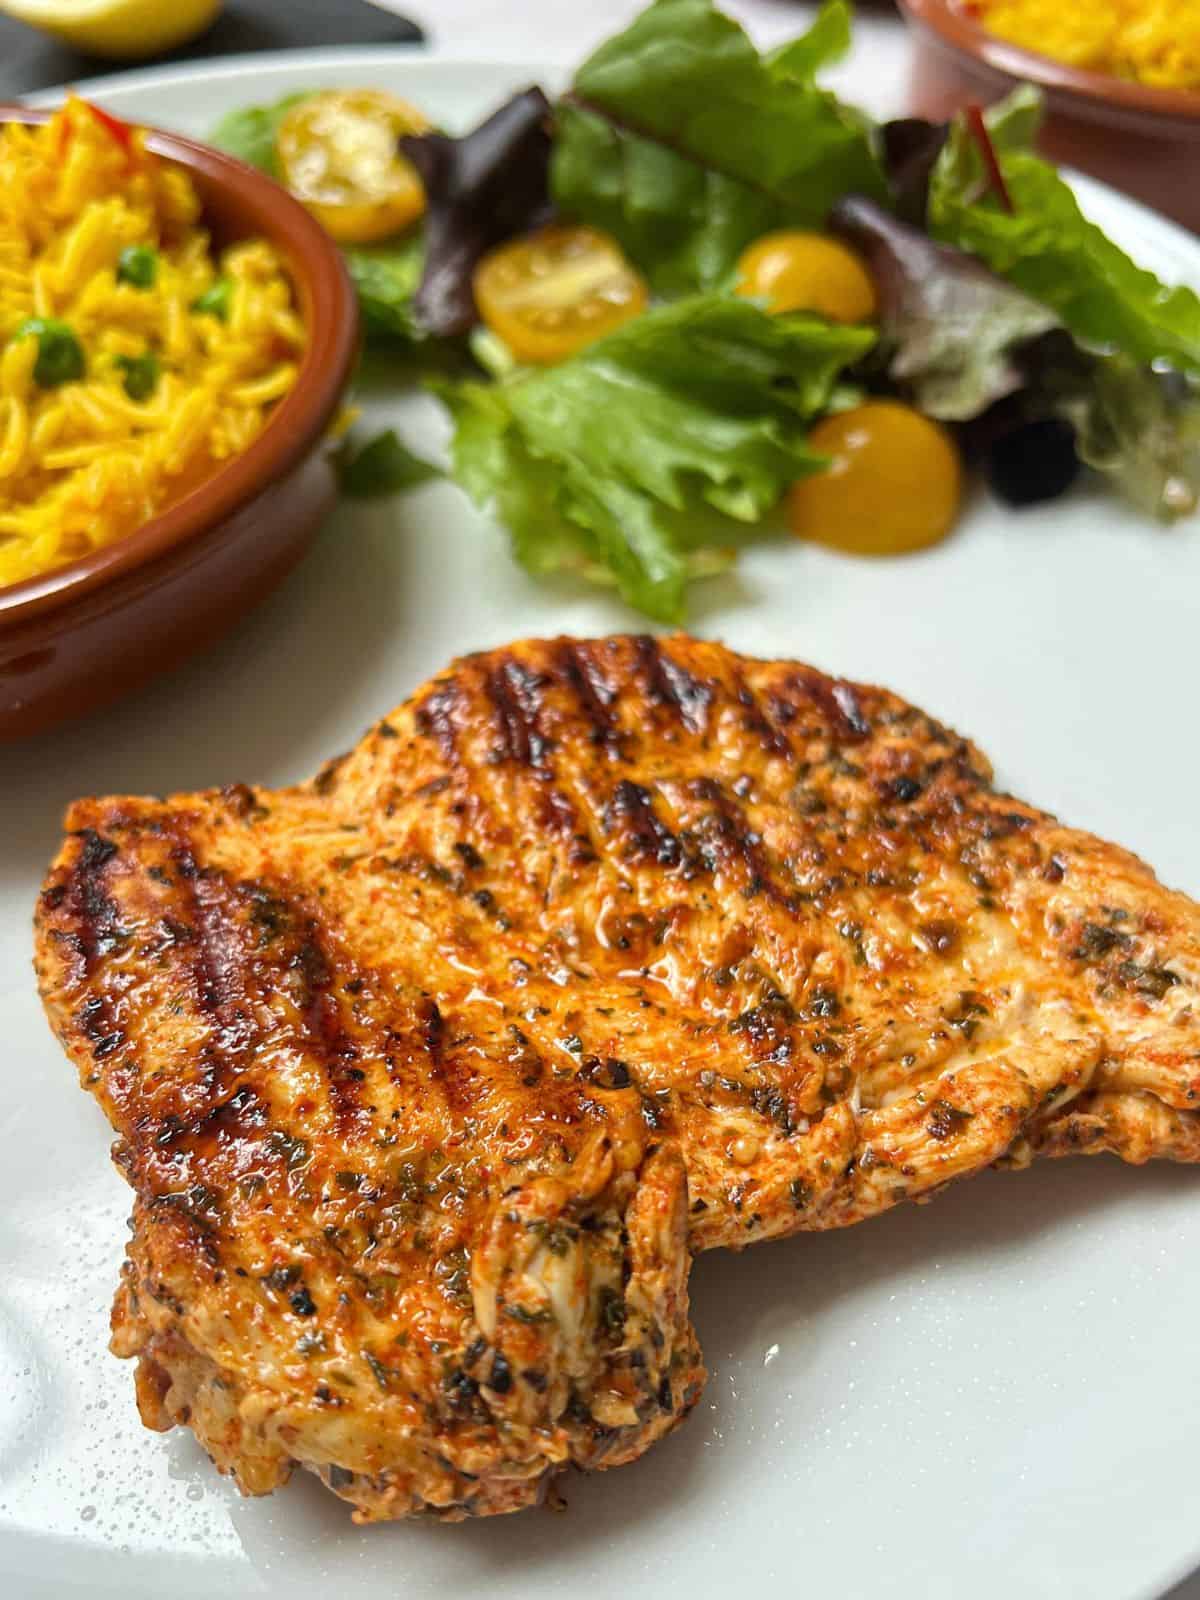 Griddled chicken breast on a plate with a bowl of rice and salad.